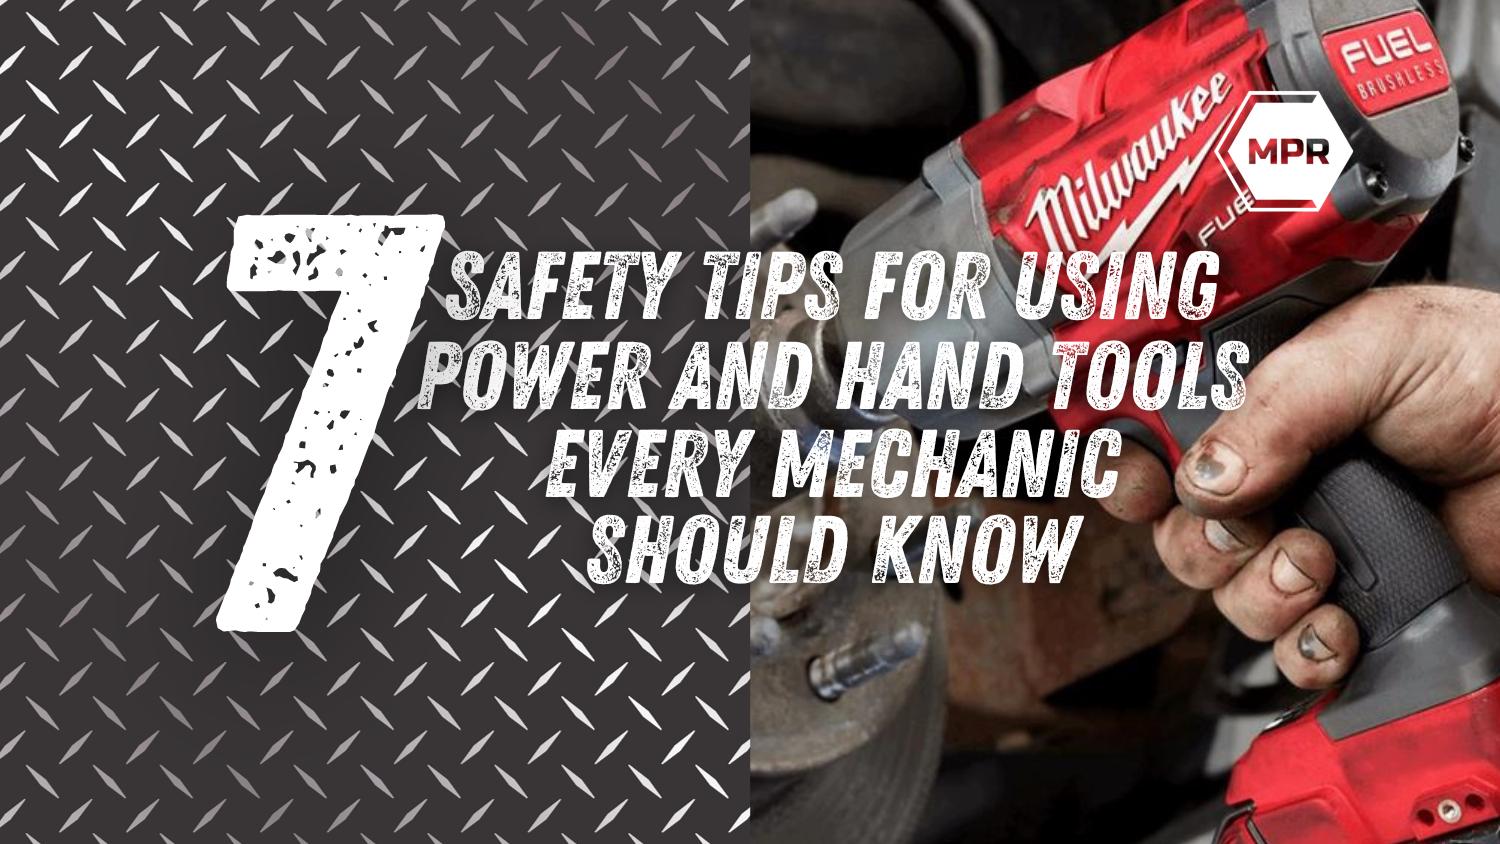 7 Safety Tips for Using Power and Hand Tools Every Mechanic Should Know